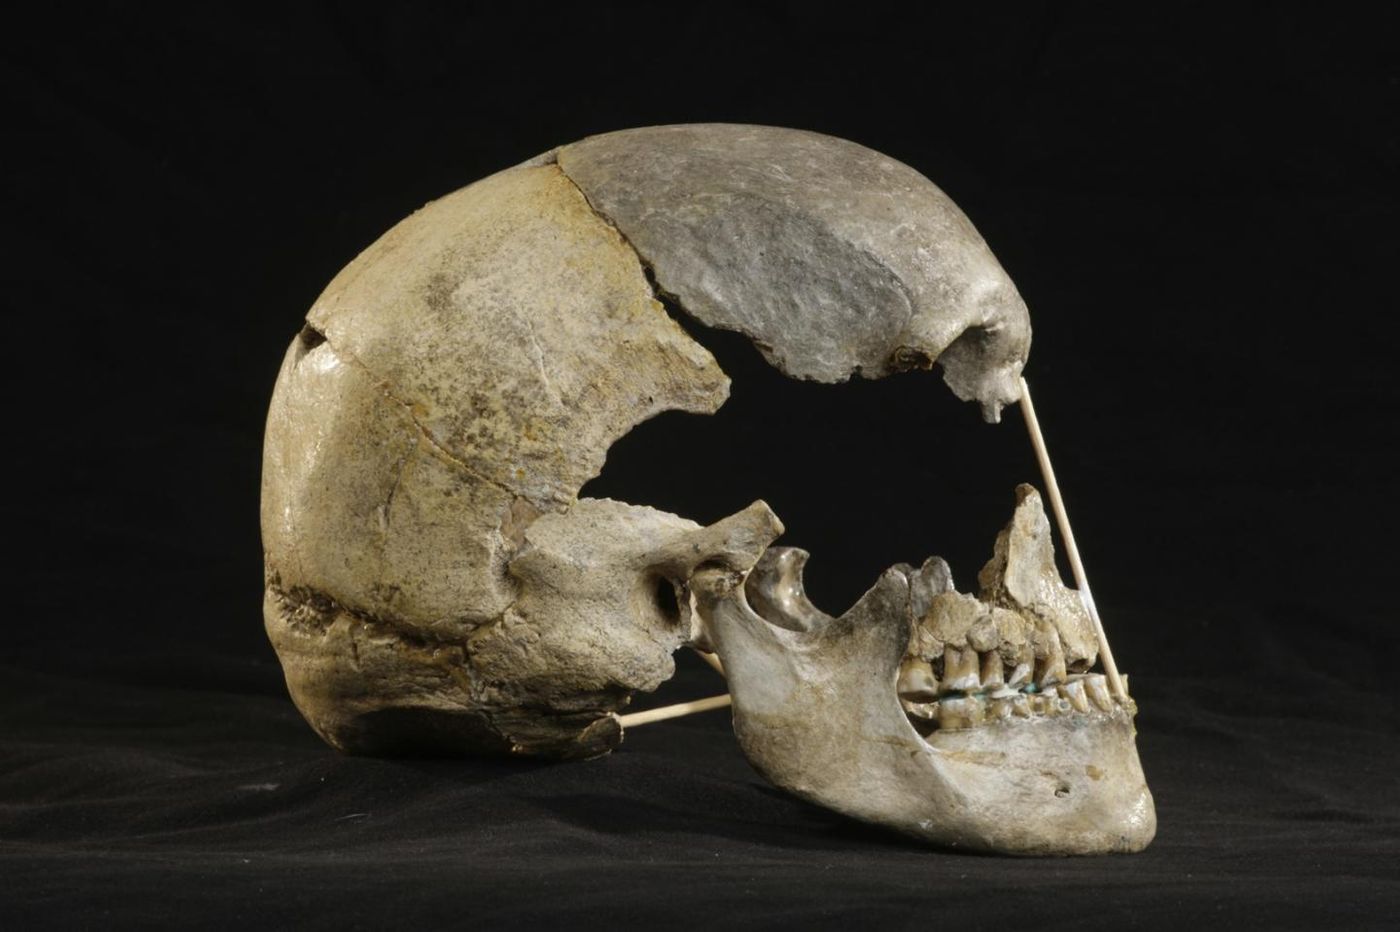 Lateral view of the mostly-complete skull of Zlatý kůň / Credit: Martin Frouz / ©Max Planck Society